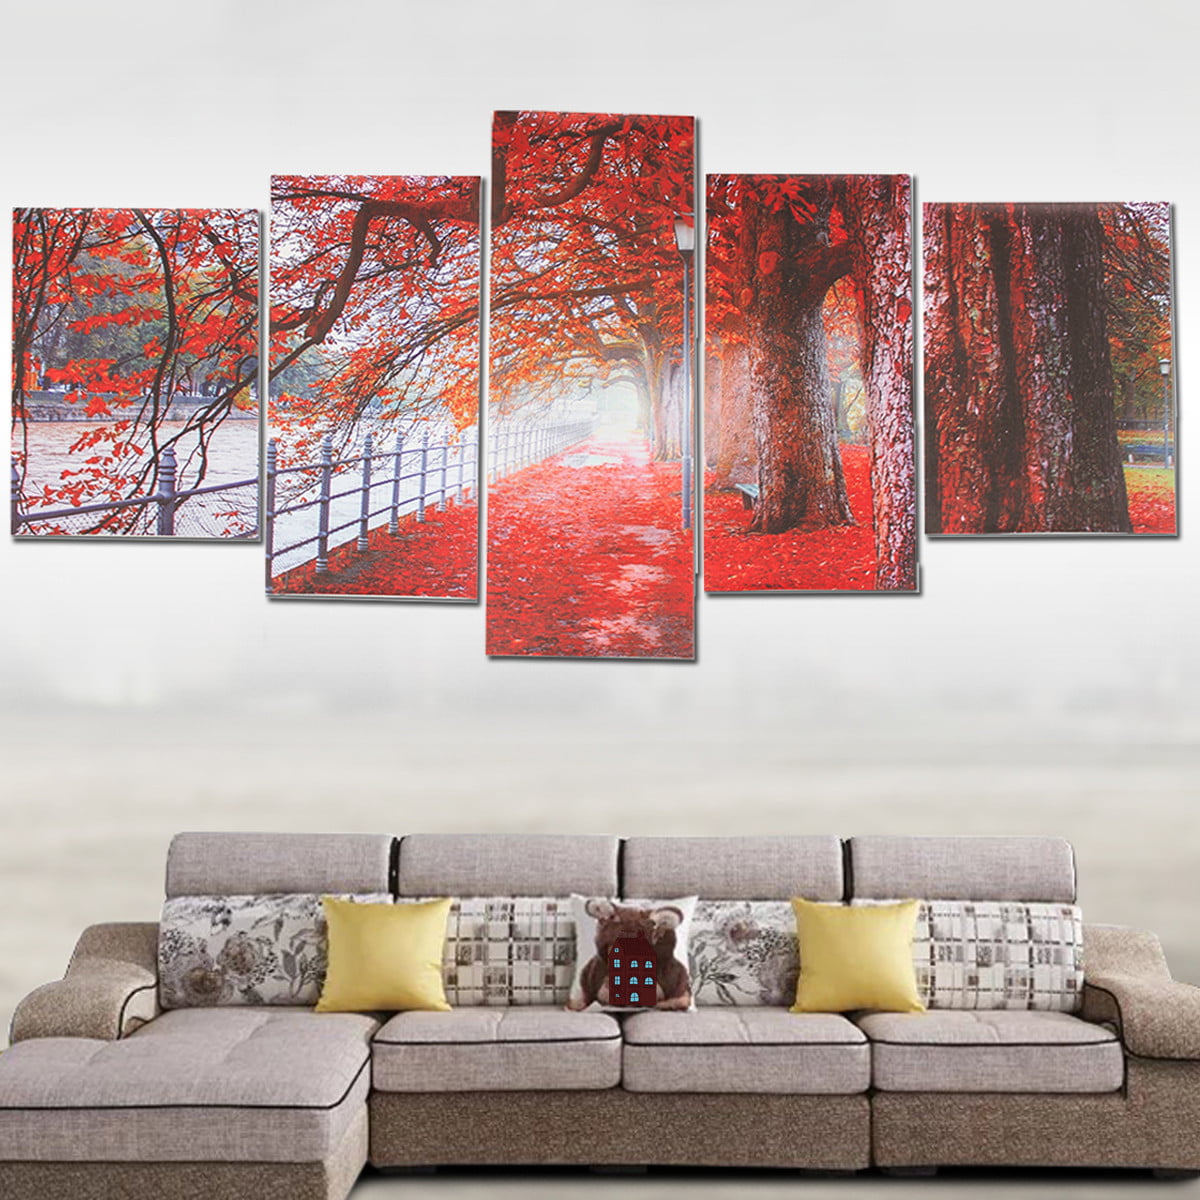 1 X Canvas Modern Wall Art Oil Painting Picture Print Unframed Home Decor Gift